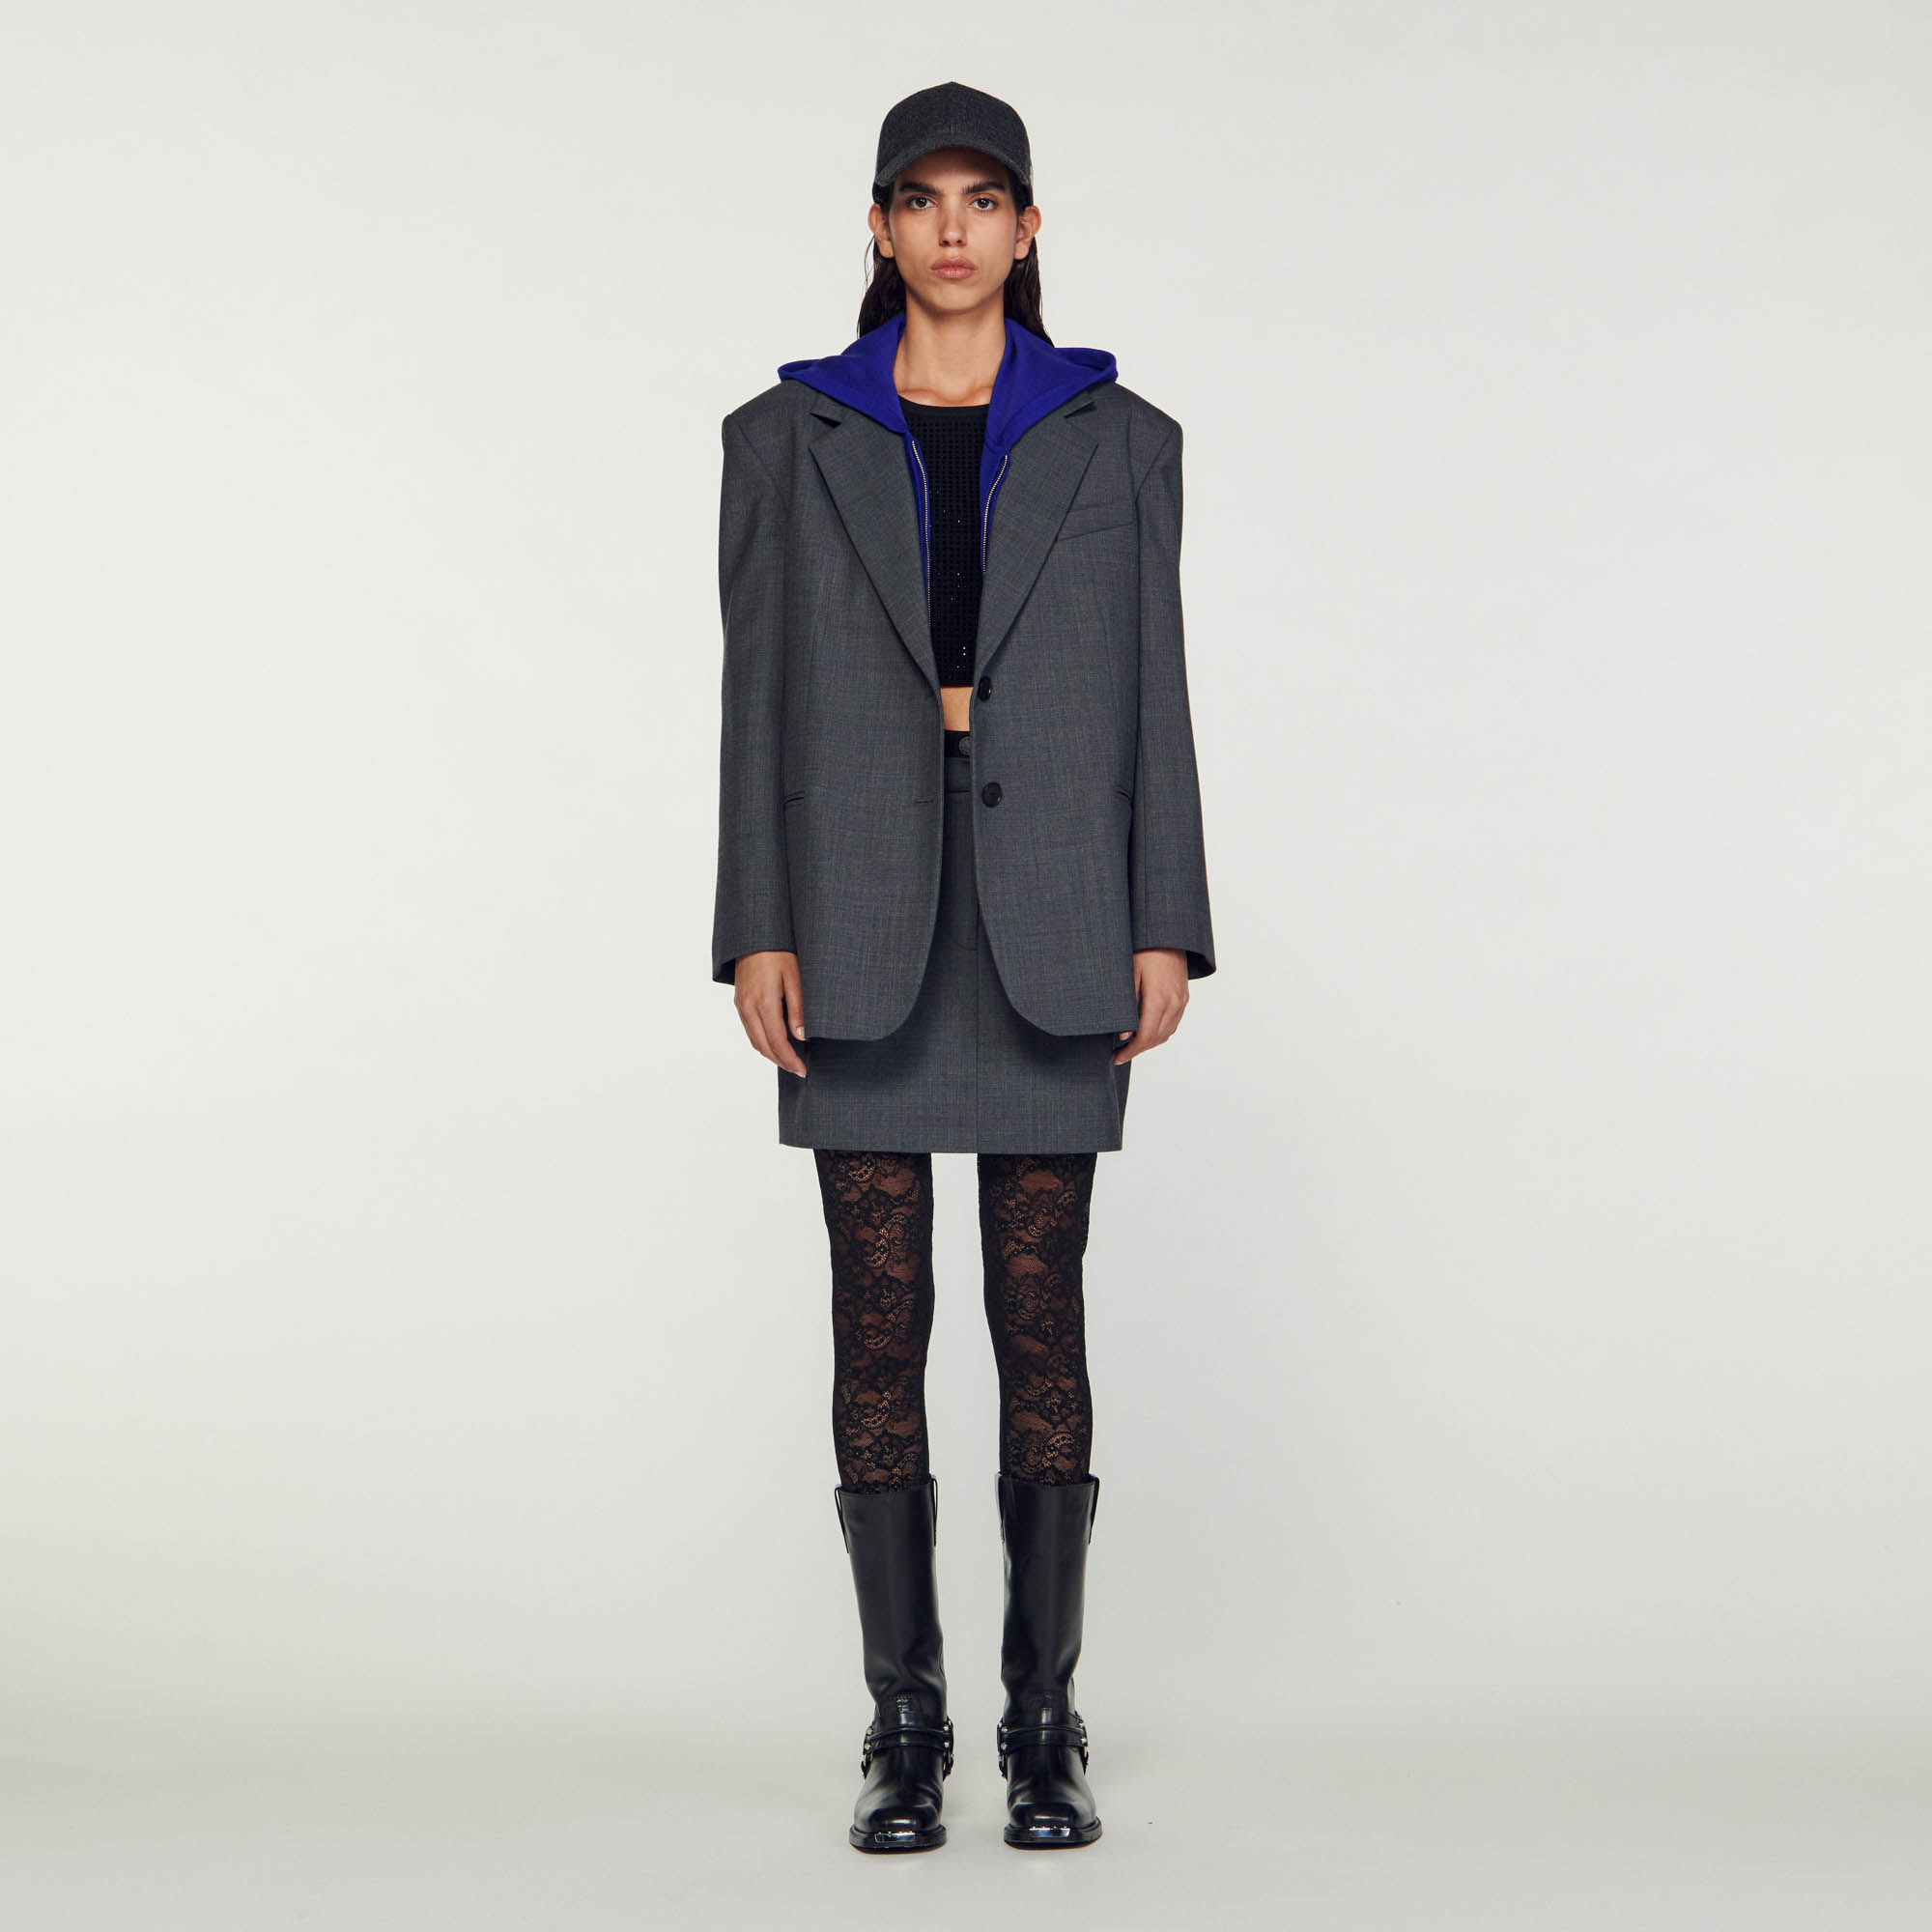 Sandro wool Oversized blazer featuring a lapel collar, long sleeves and welt pockets